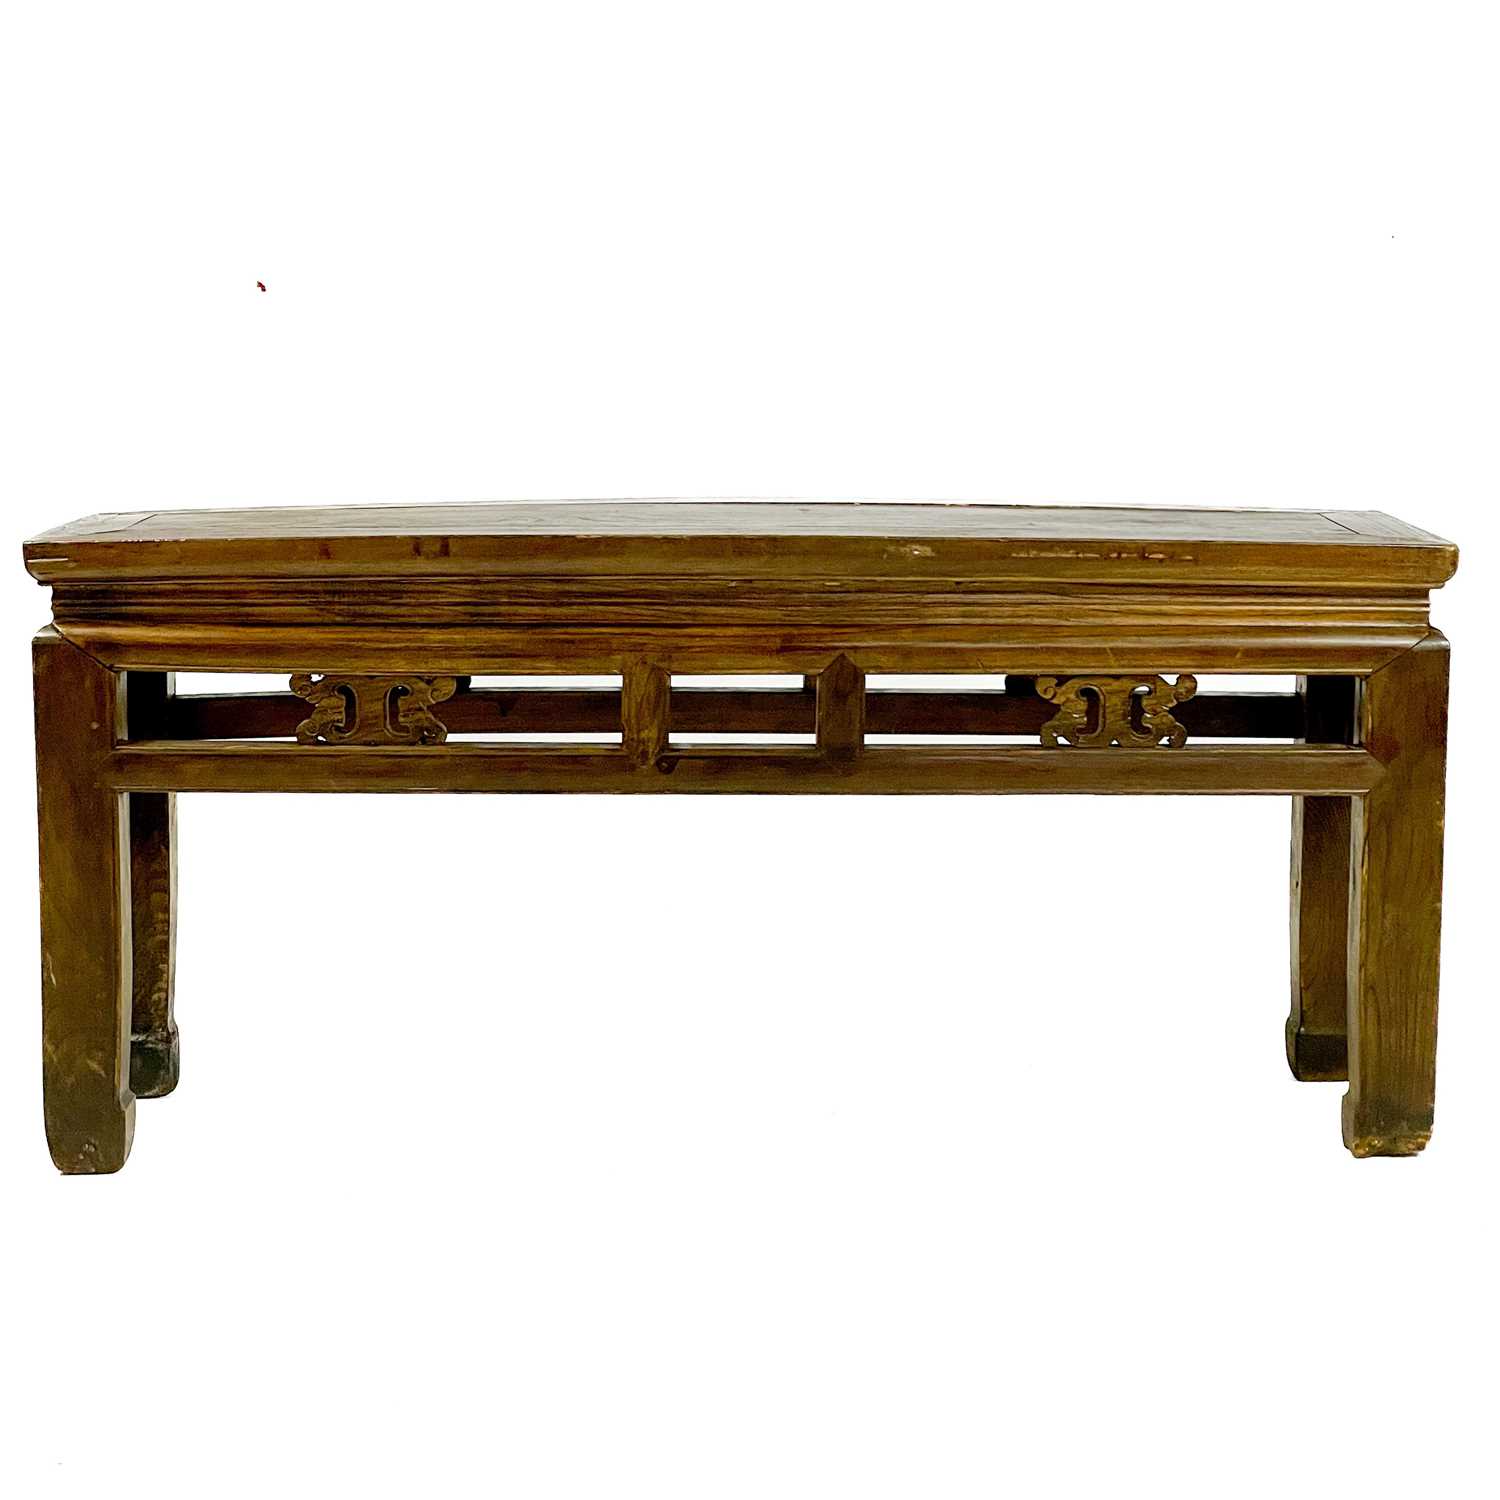 Two similar Chinese hardwood centre tables - Image 4 of 5